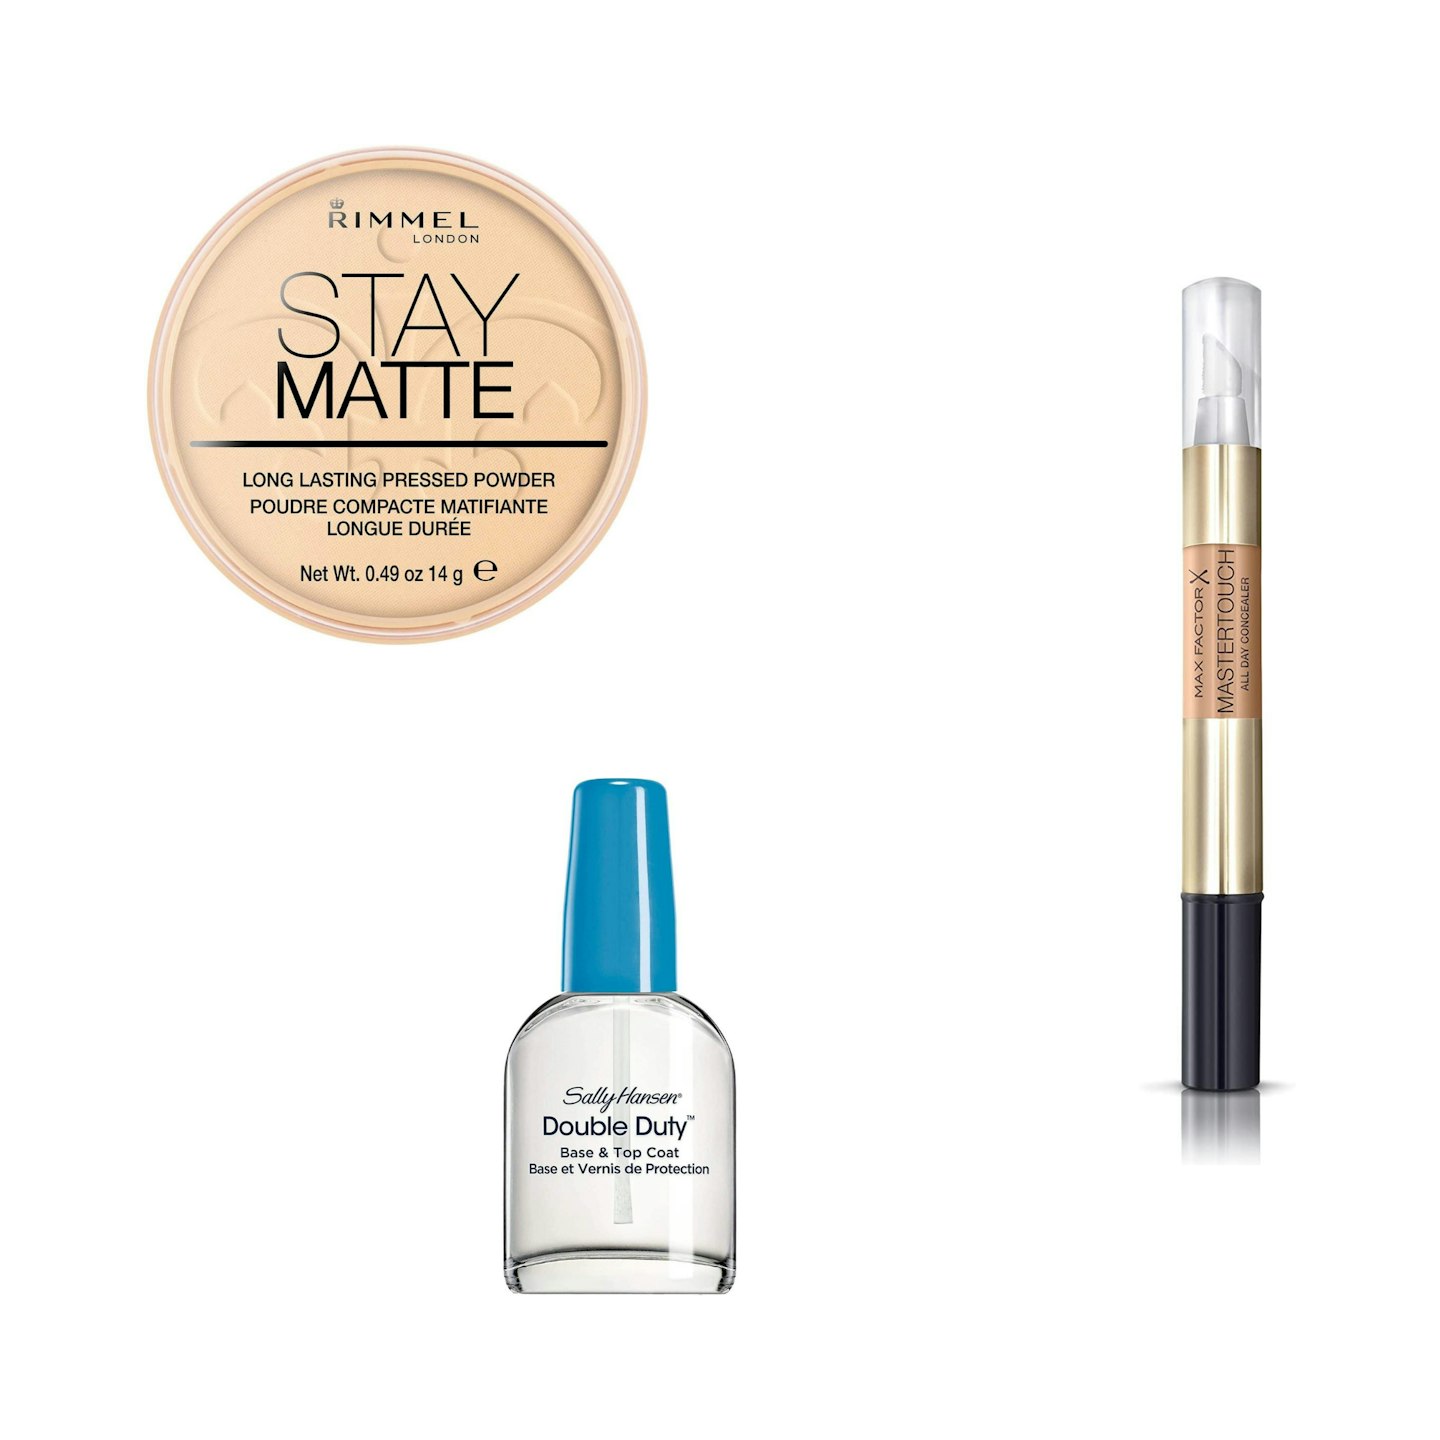 Up to 45% off Cosmetics from Rimmel, Max Factor and Sally Hansen